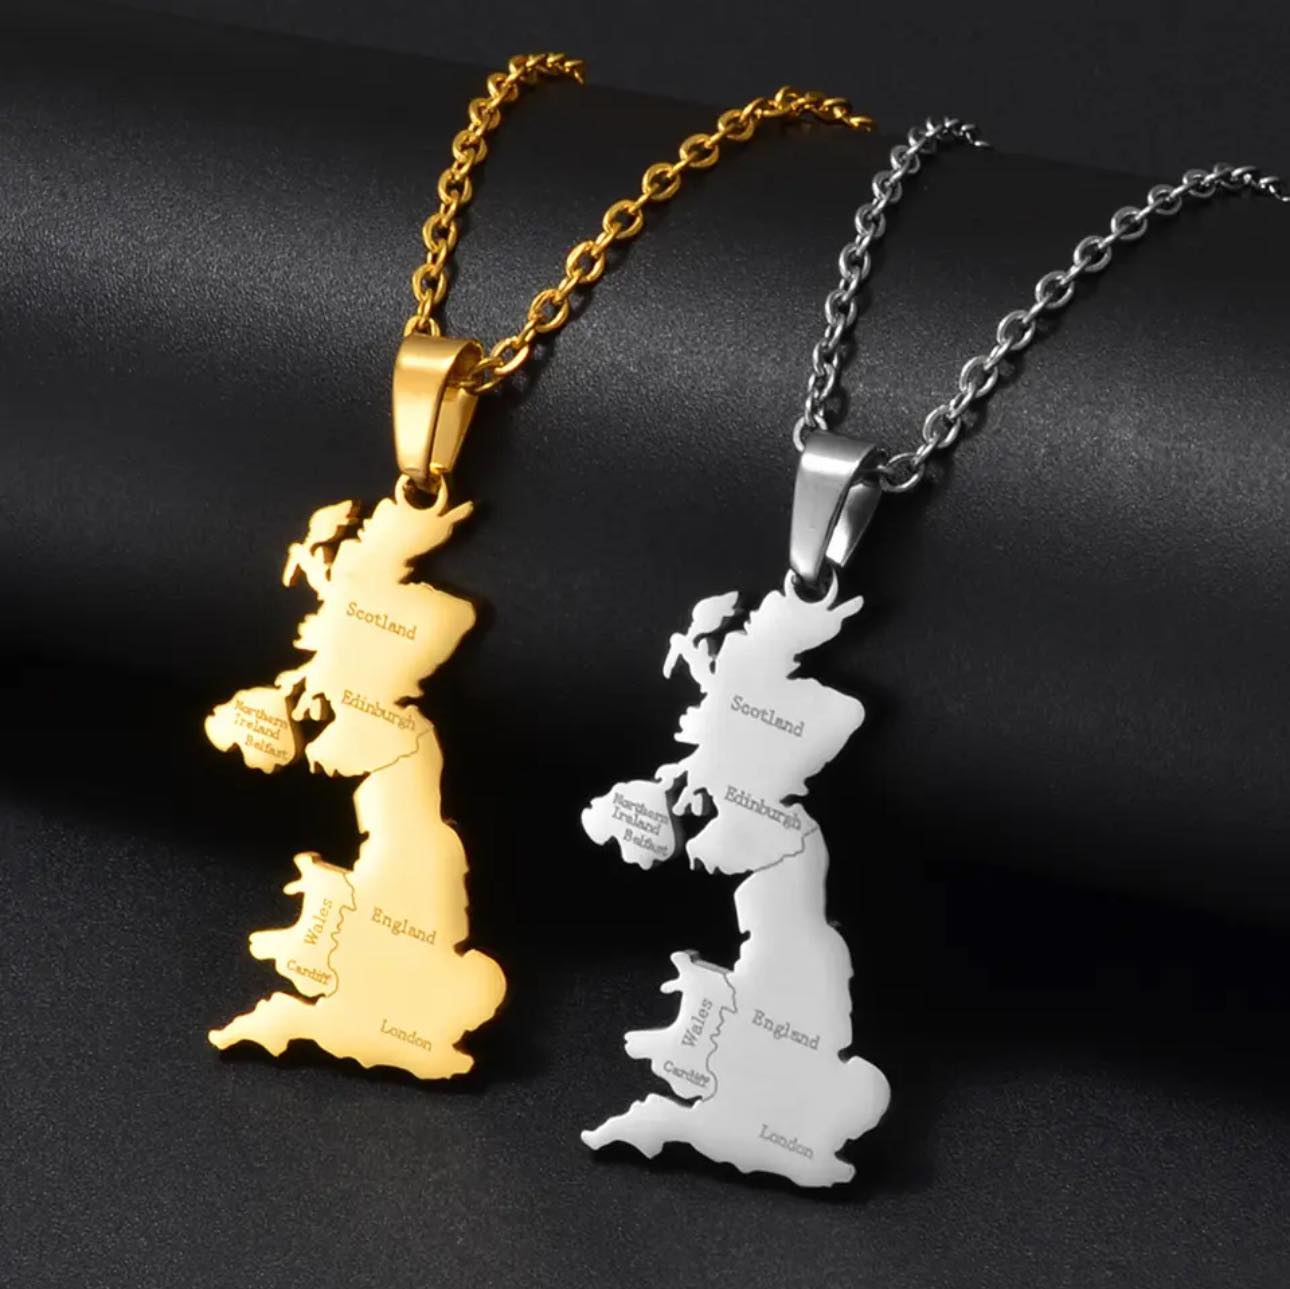 United Kingdom Map & Cities Necklace